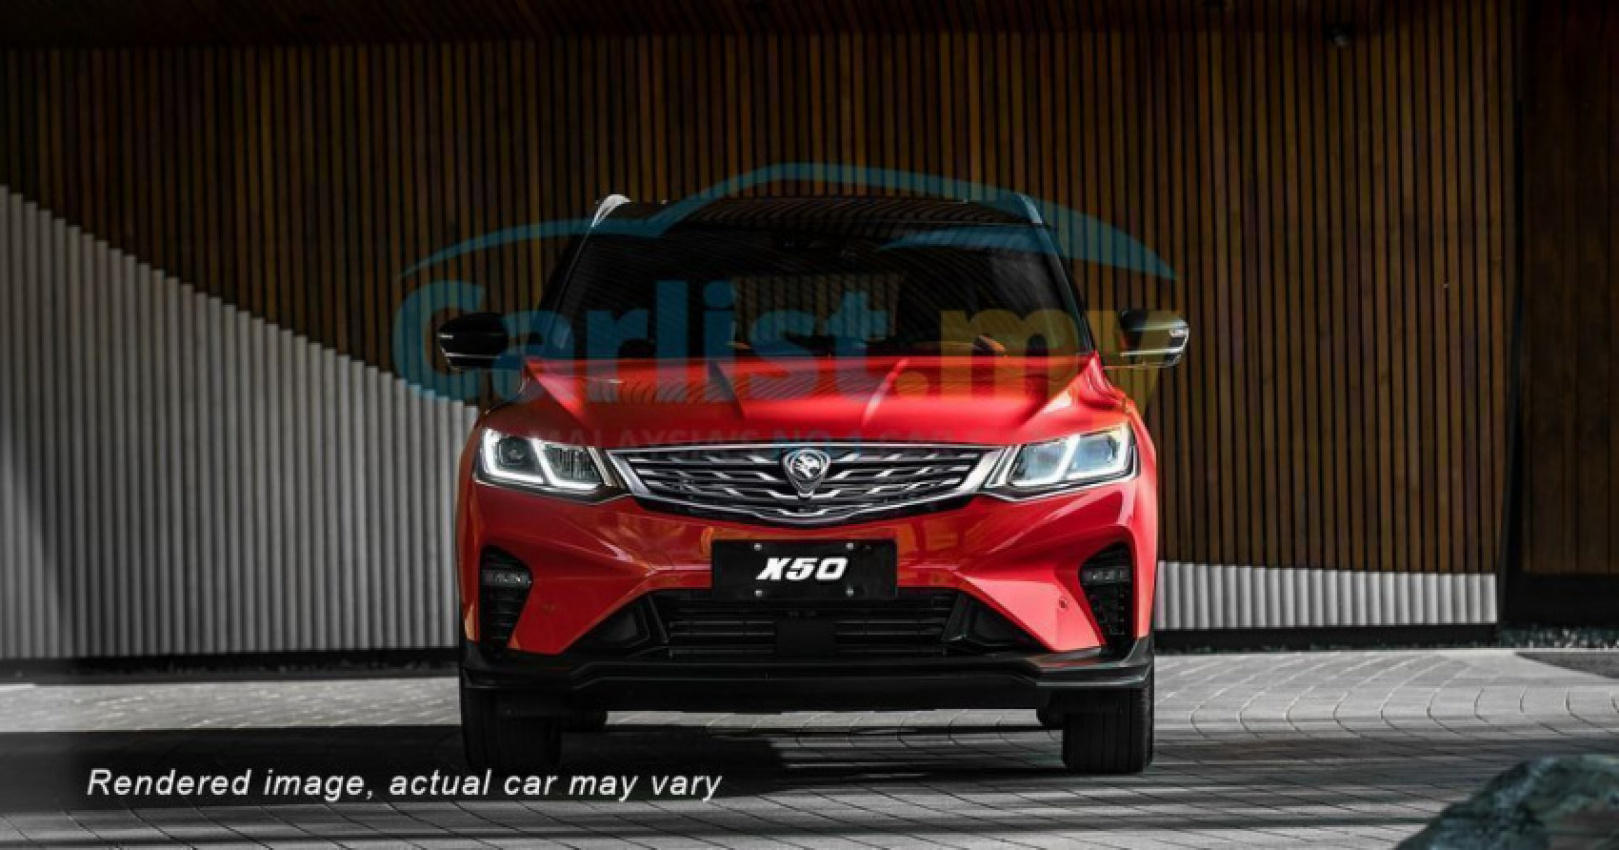 autos, cars, reviews, toyota, corolla cross, d55l, insights, perodua, perodua suv, proton, proton x50, toyota corolla cross, x50, x50 malaysia, enter the toyota corolla cross, another hotly anticipated suv like the x50 and d55l